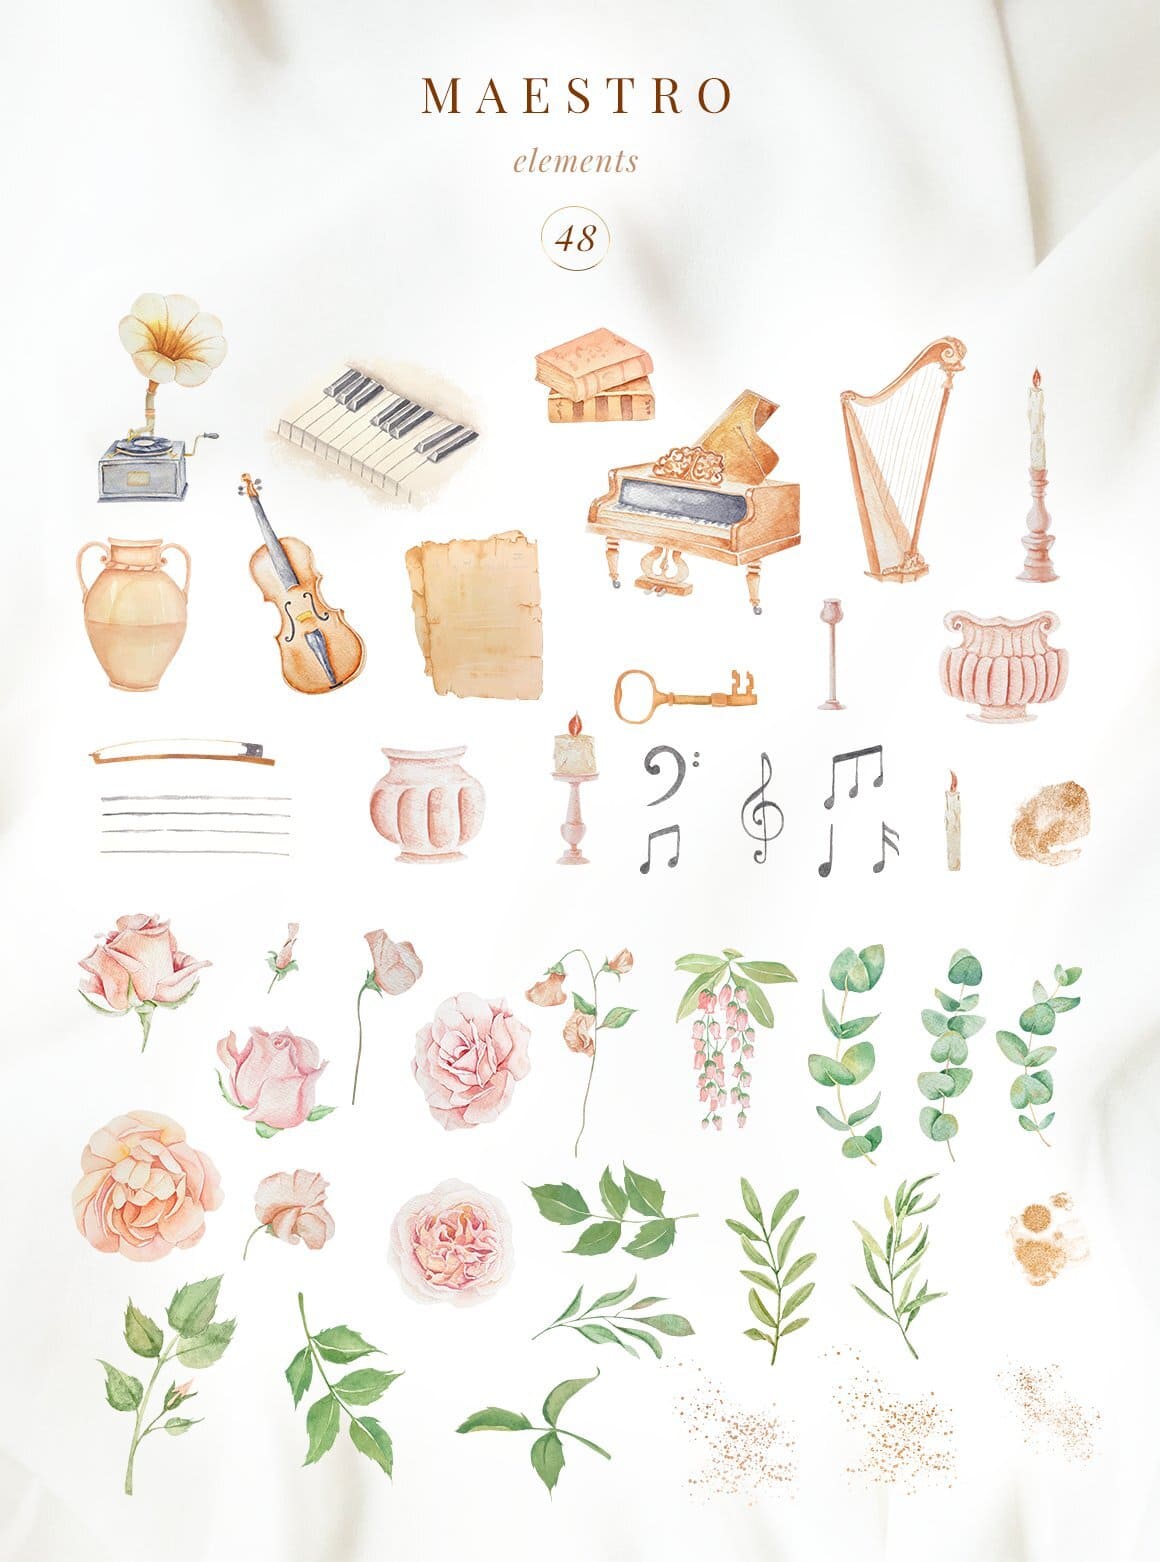 48 maestro elements from the image of musical instruments, notes, candles and flowers.